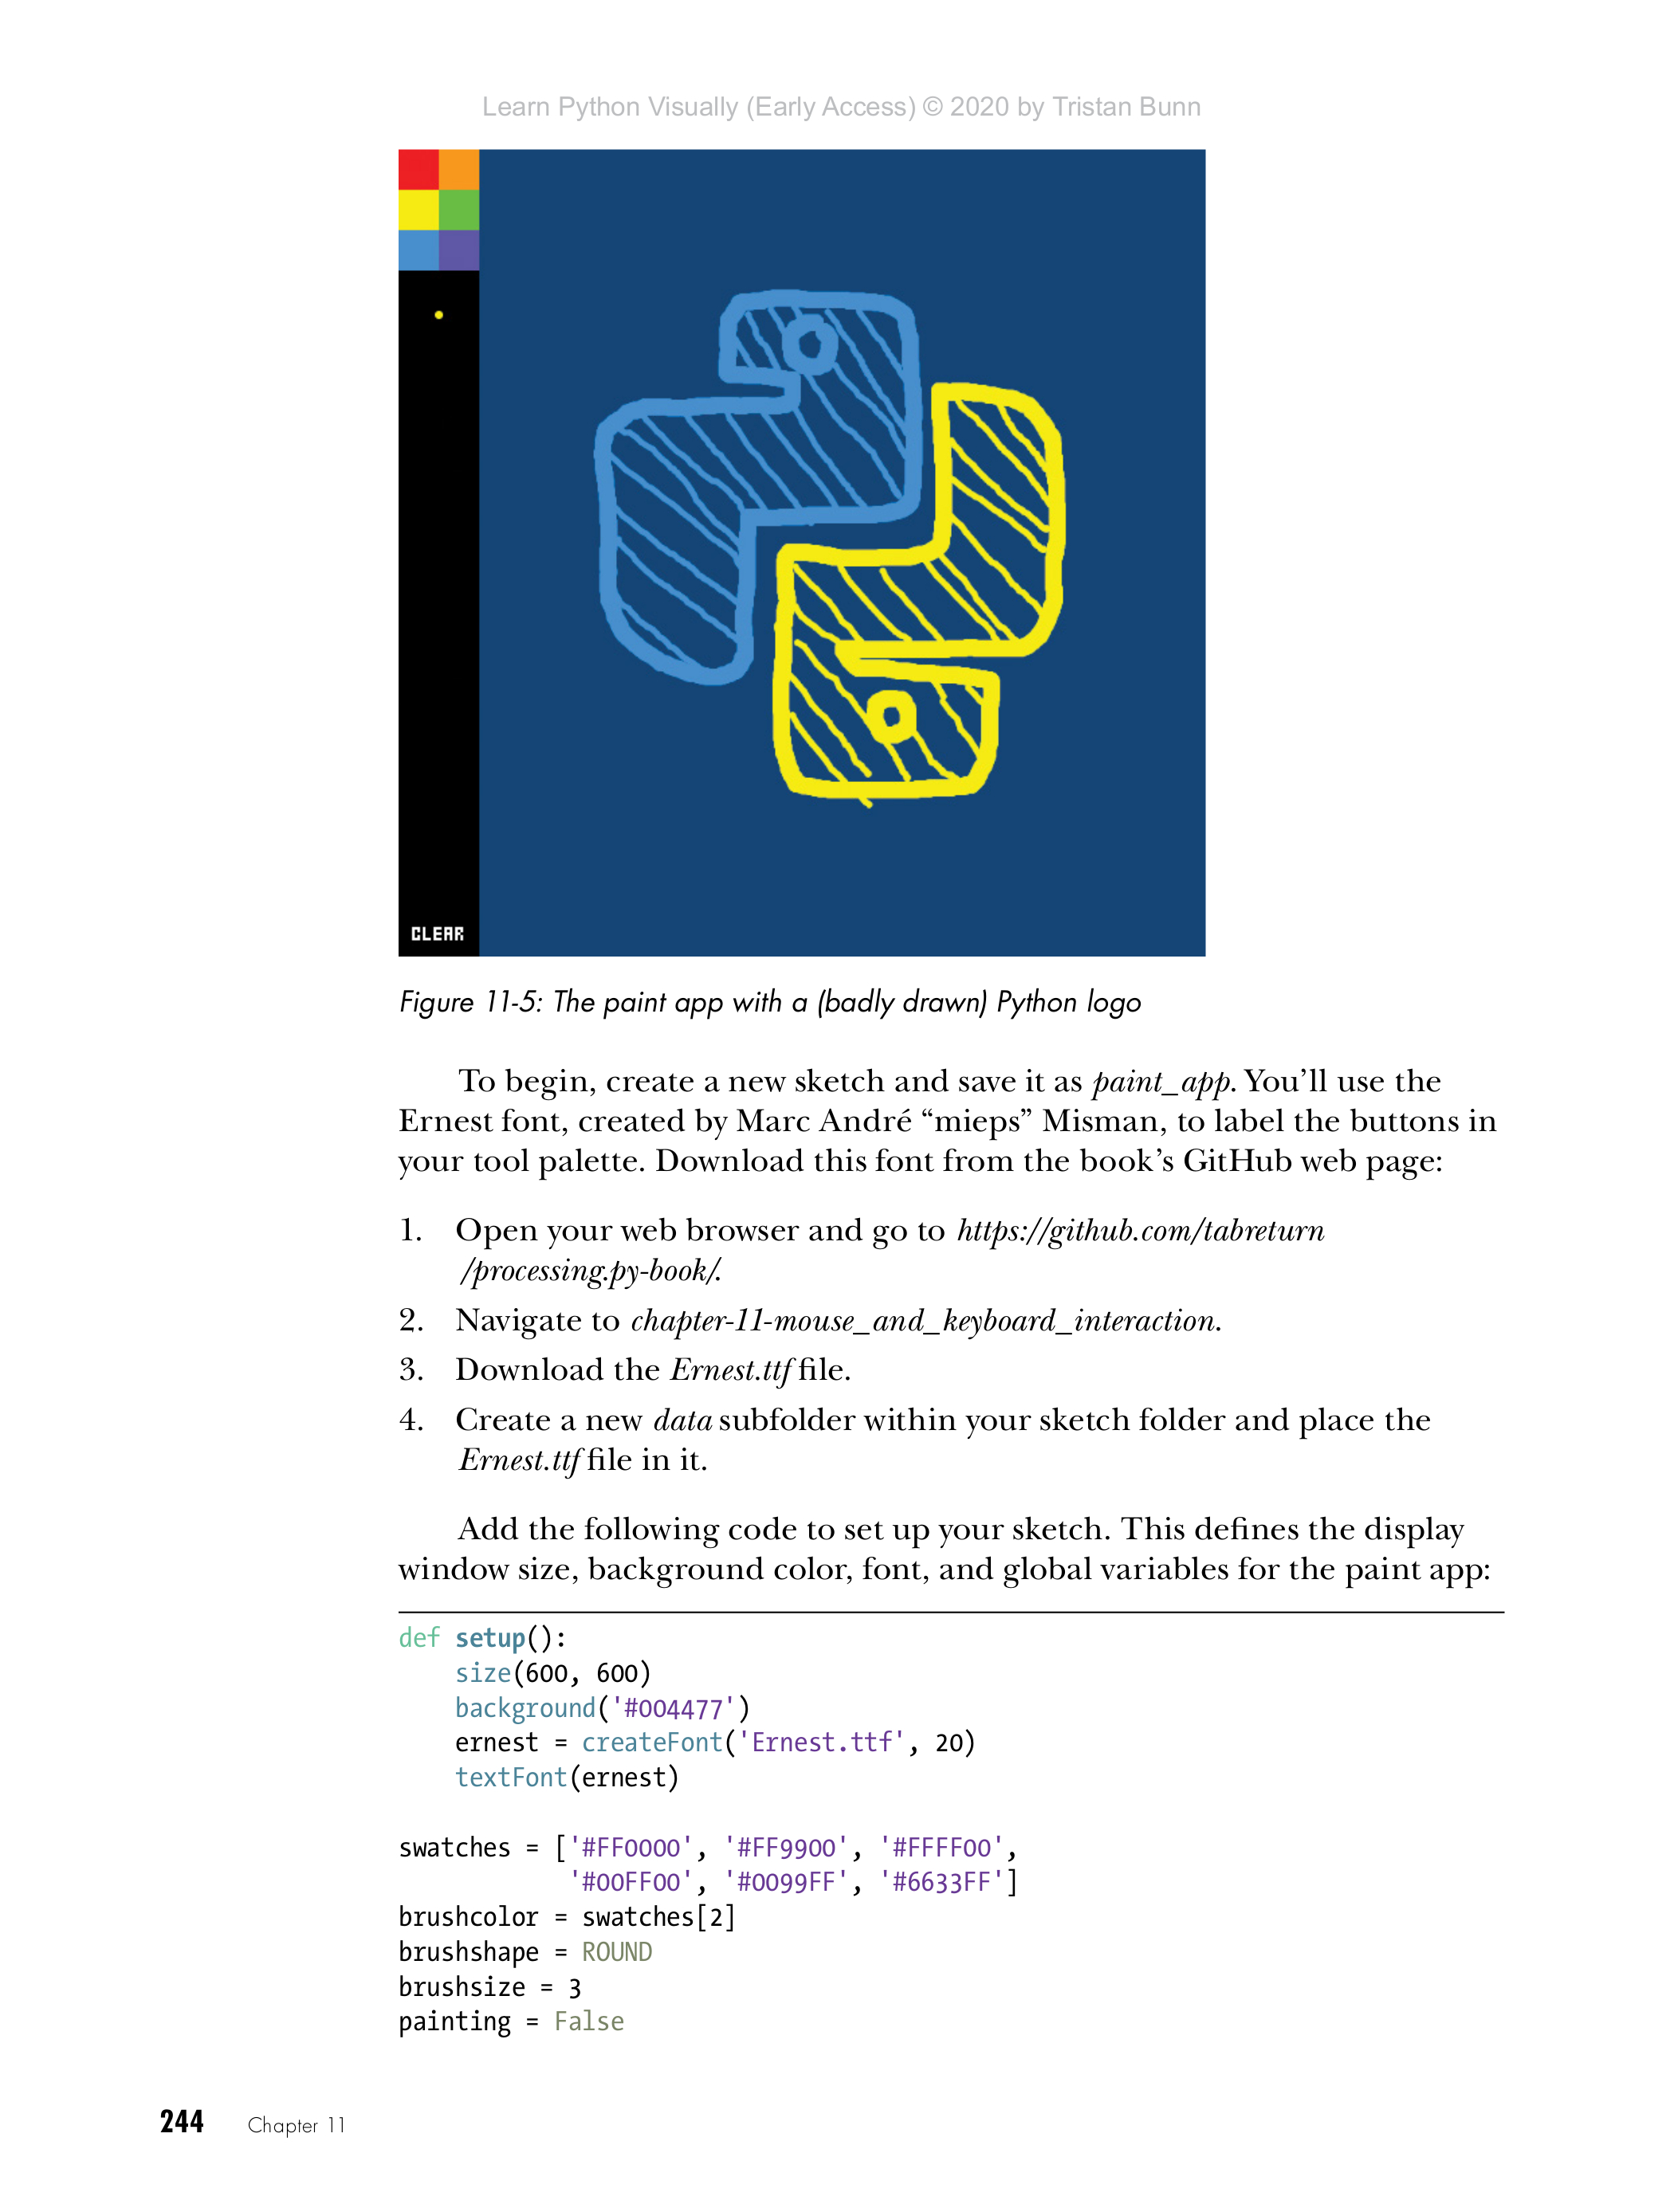 Learn Python Visually page 244